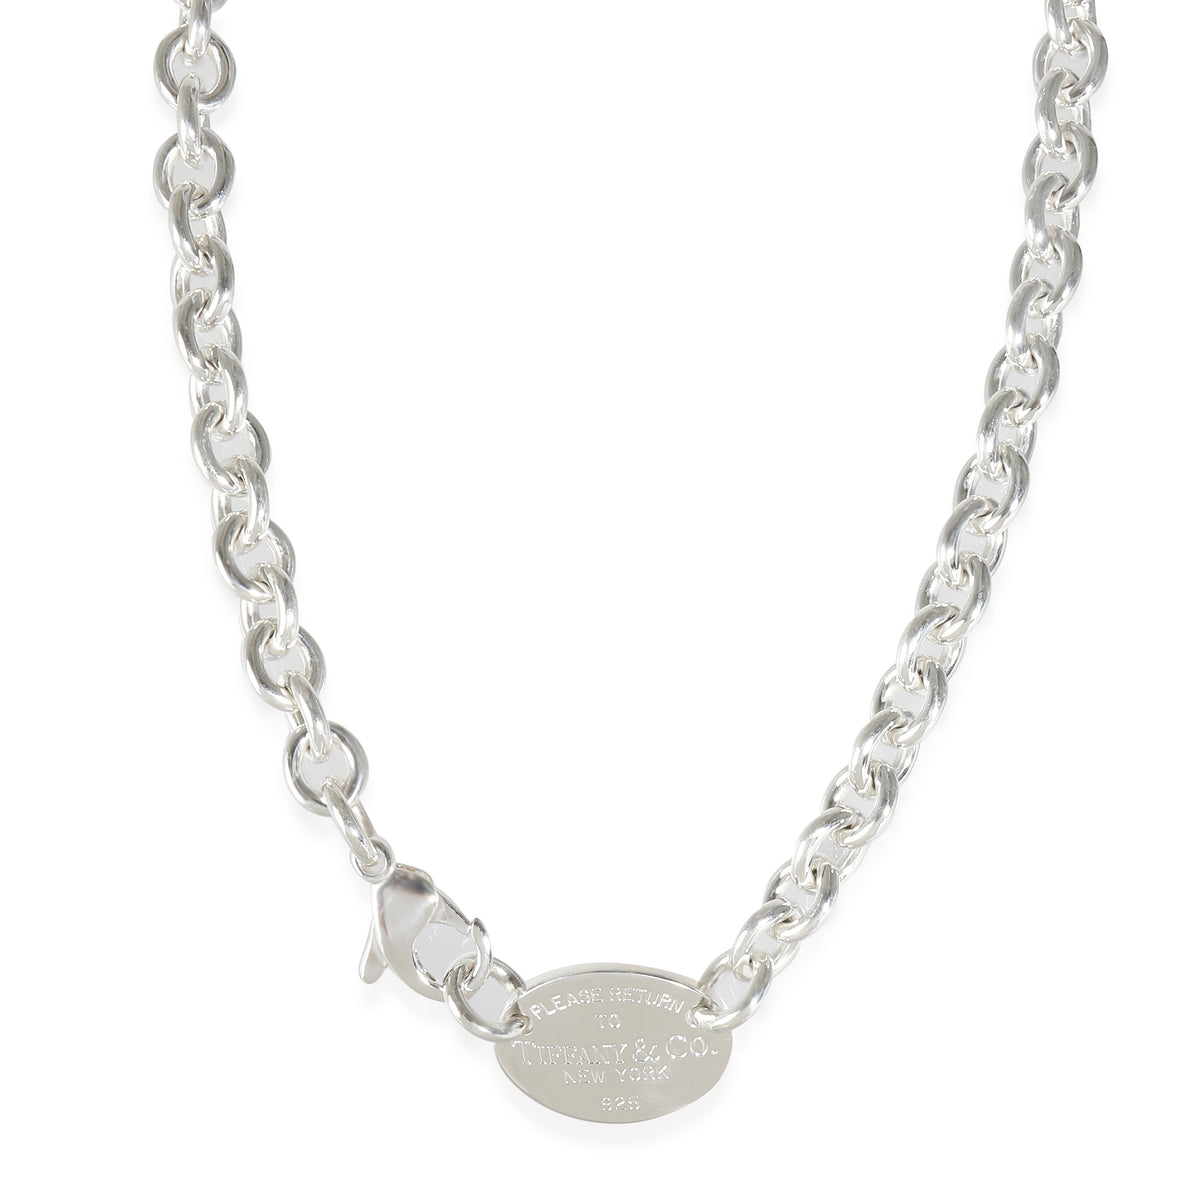 Return To Tiffany Necklace in Sterling Silver